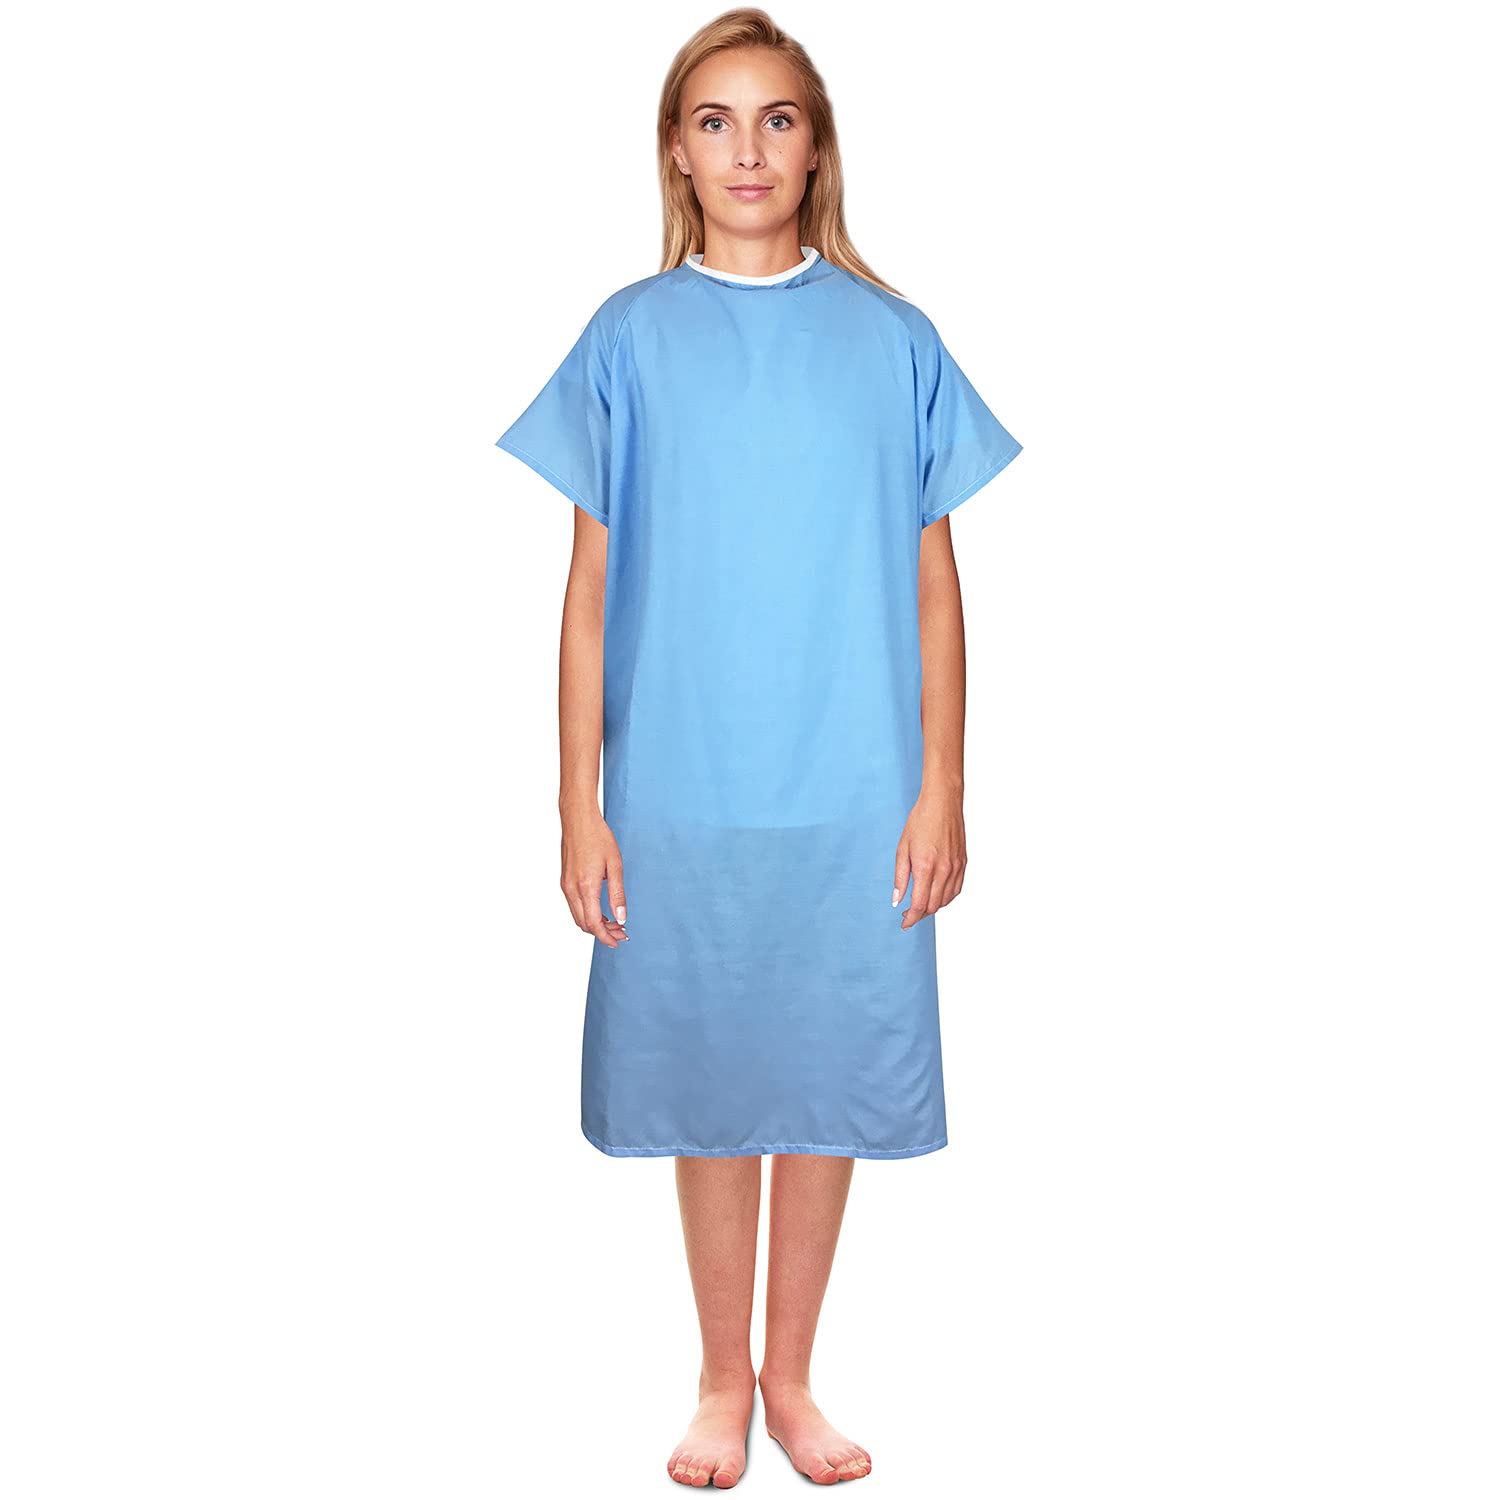 Back Dori Patient Gown in Ahmedabad at best price by Alliance Surgicare -  Justdial